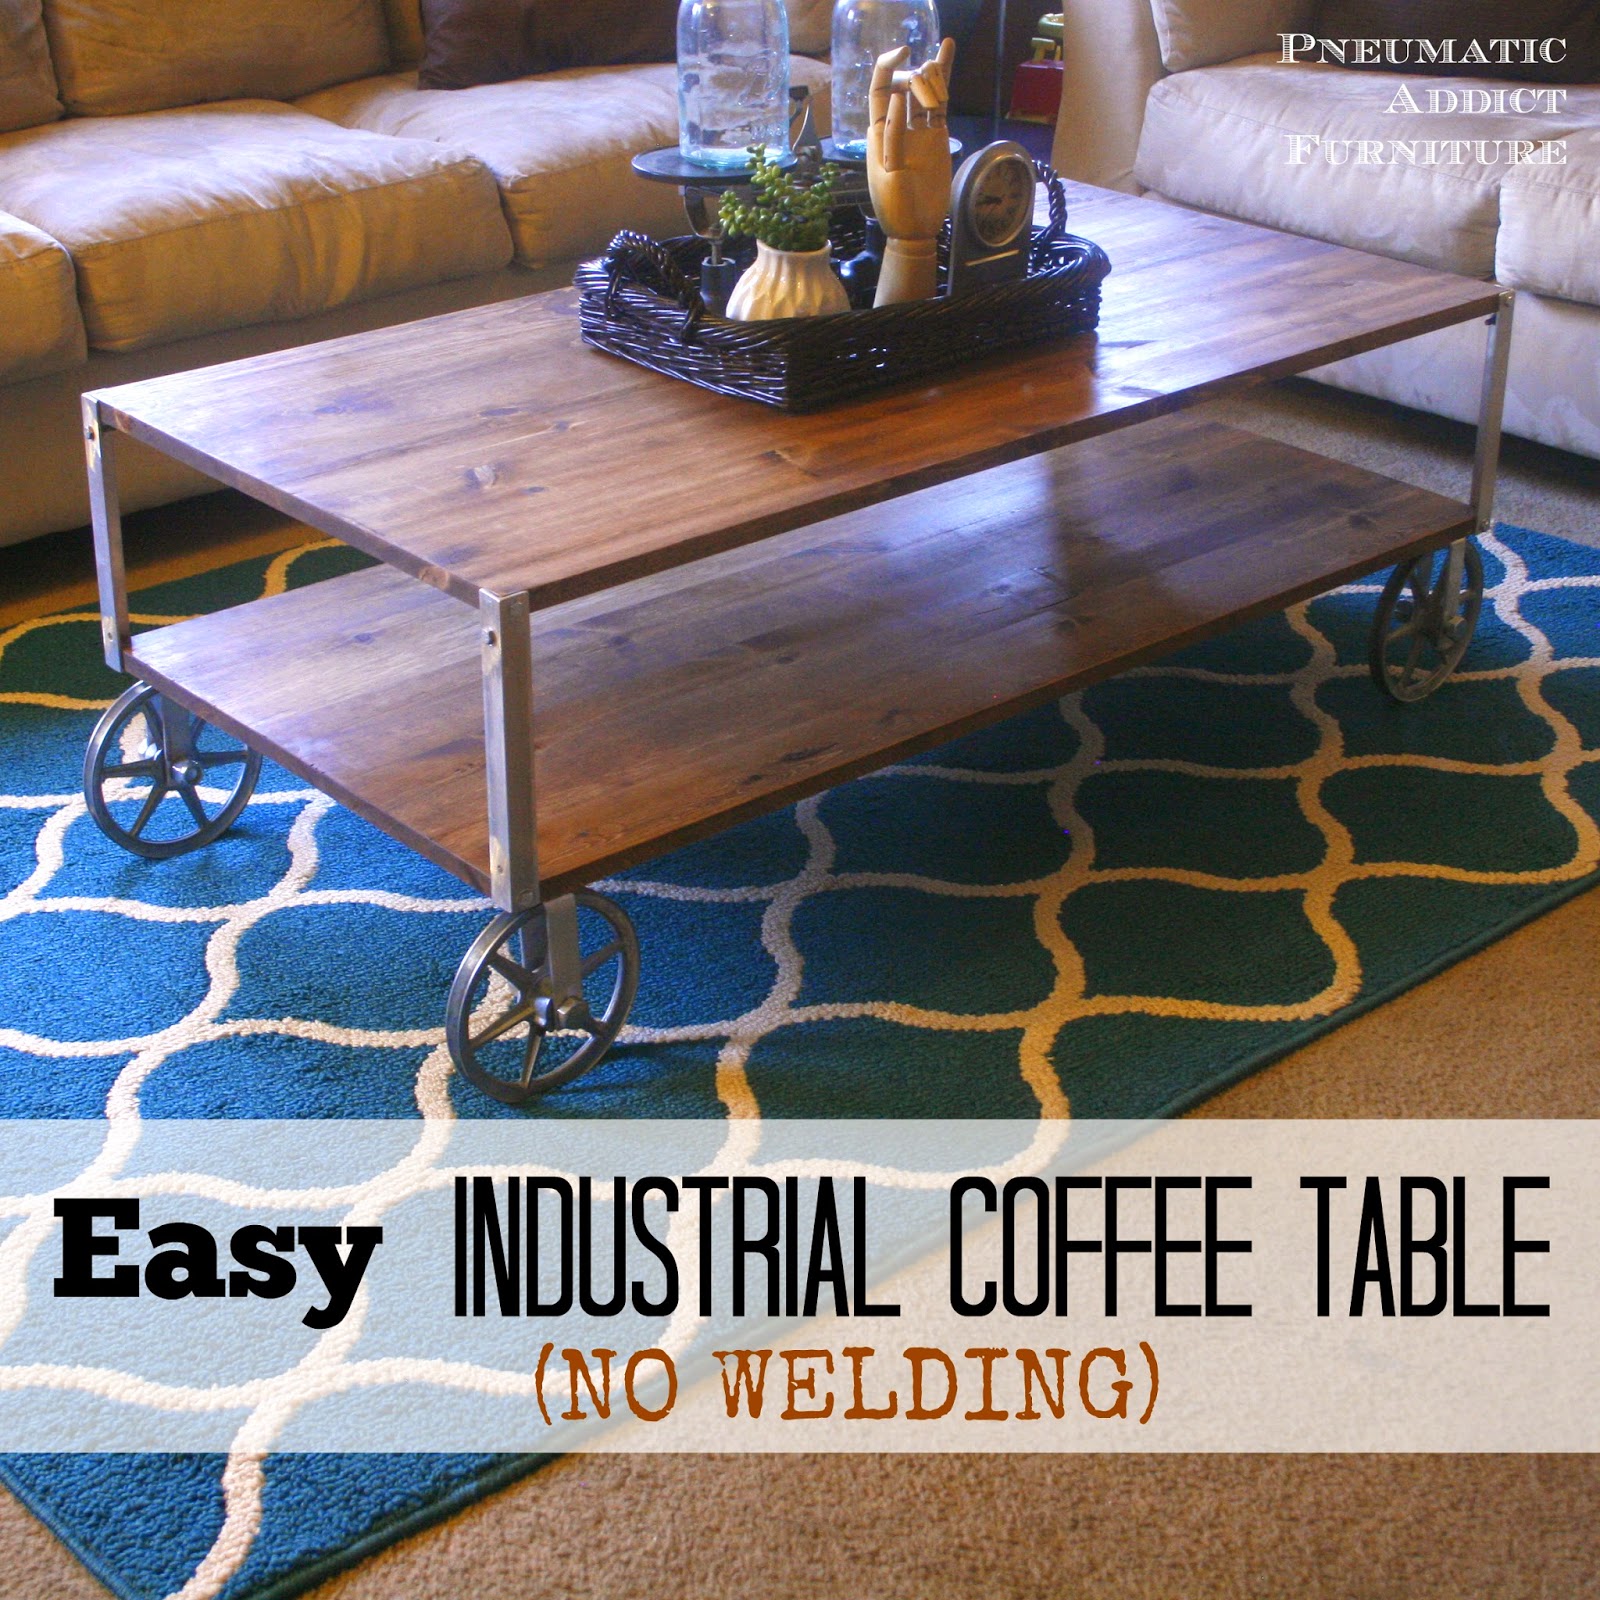 EASY Industrial Coffee Table (No Welding!) | Pneumatic Addict